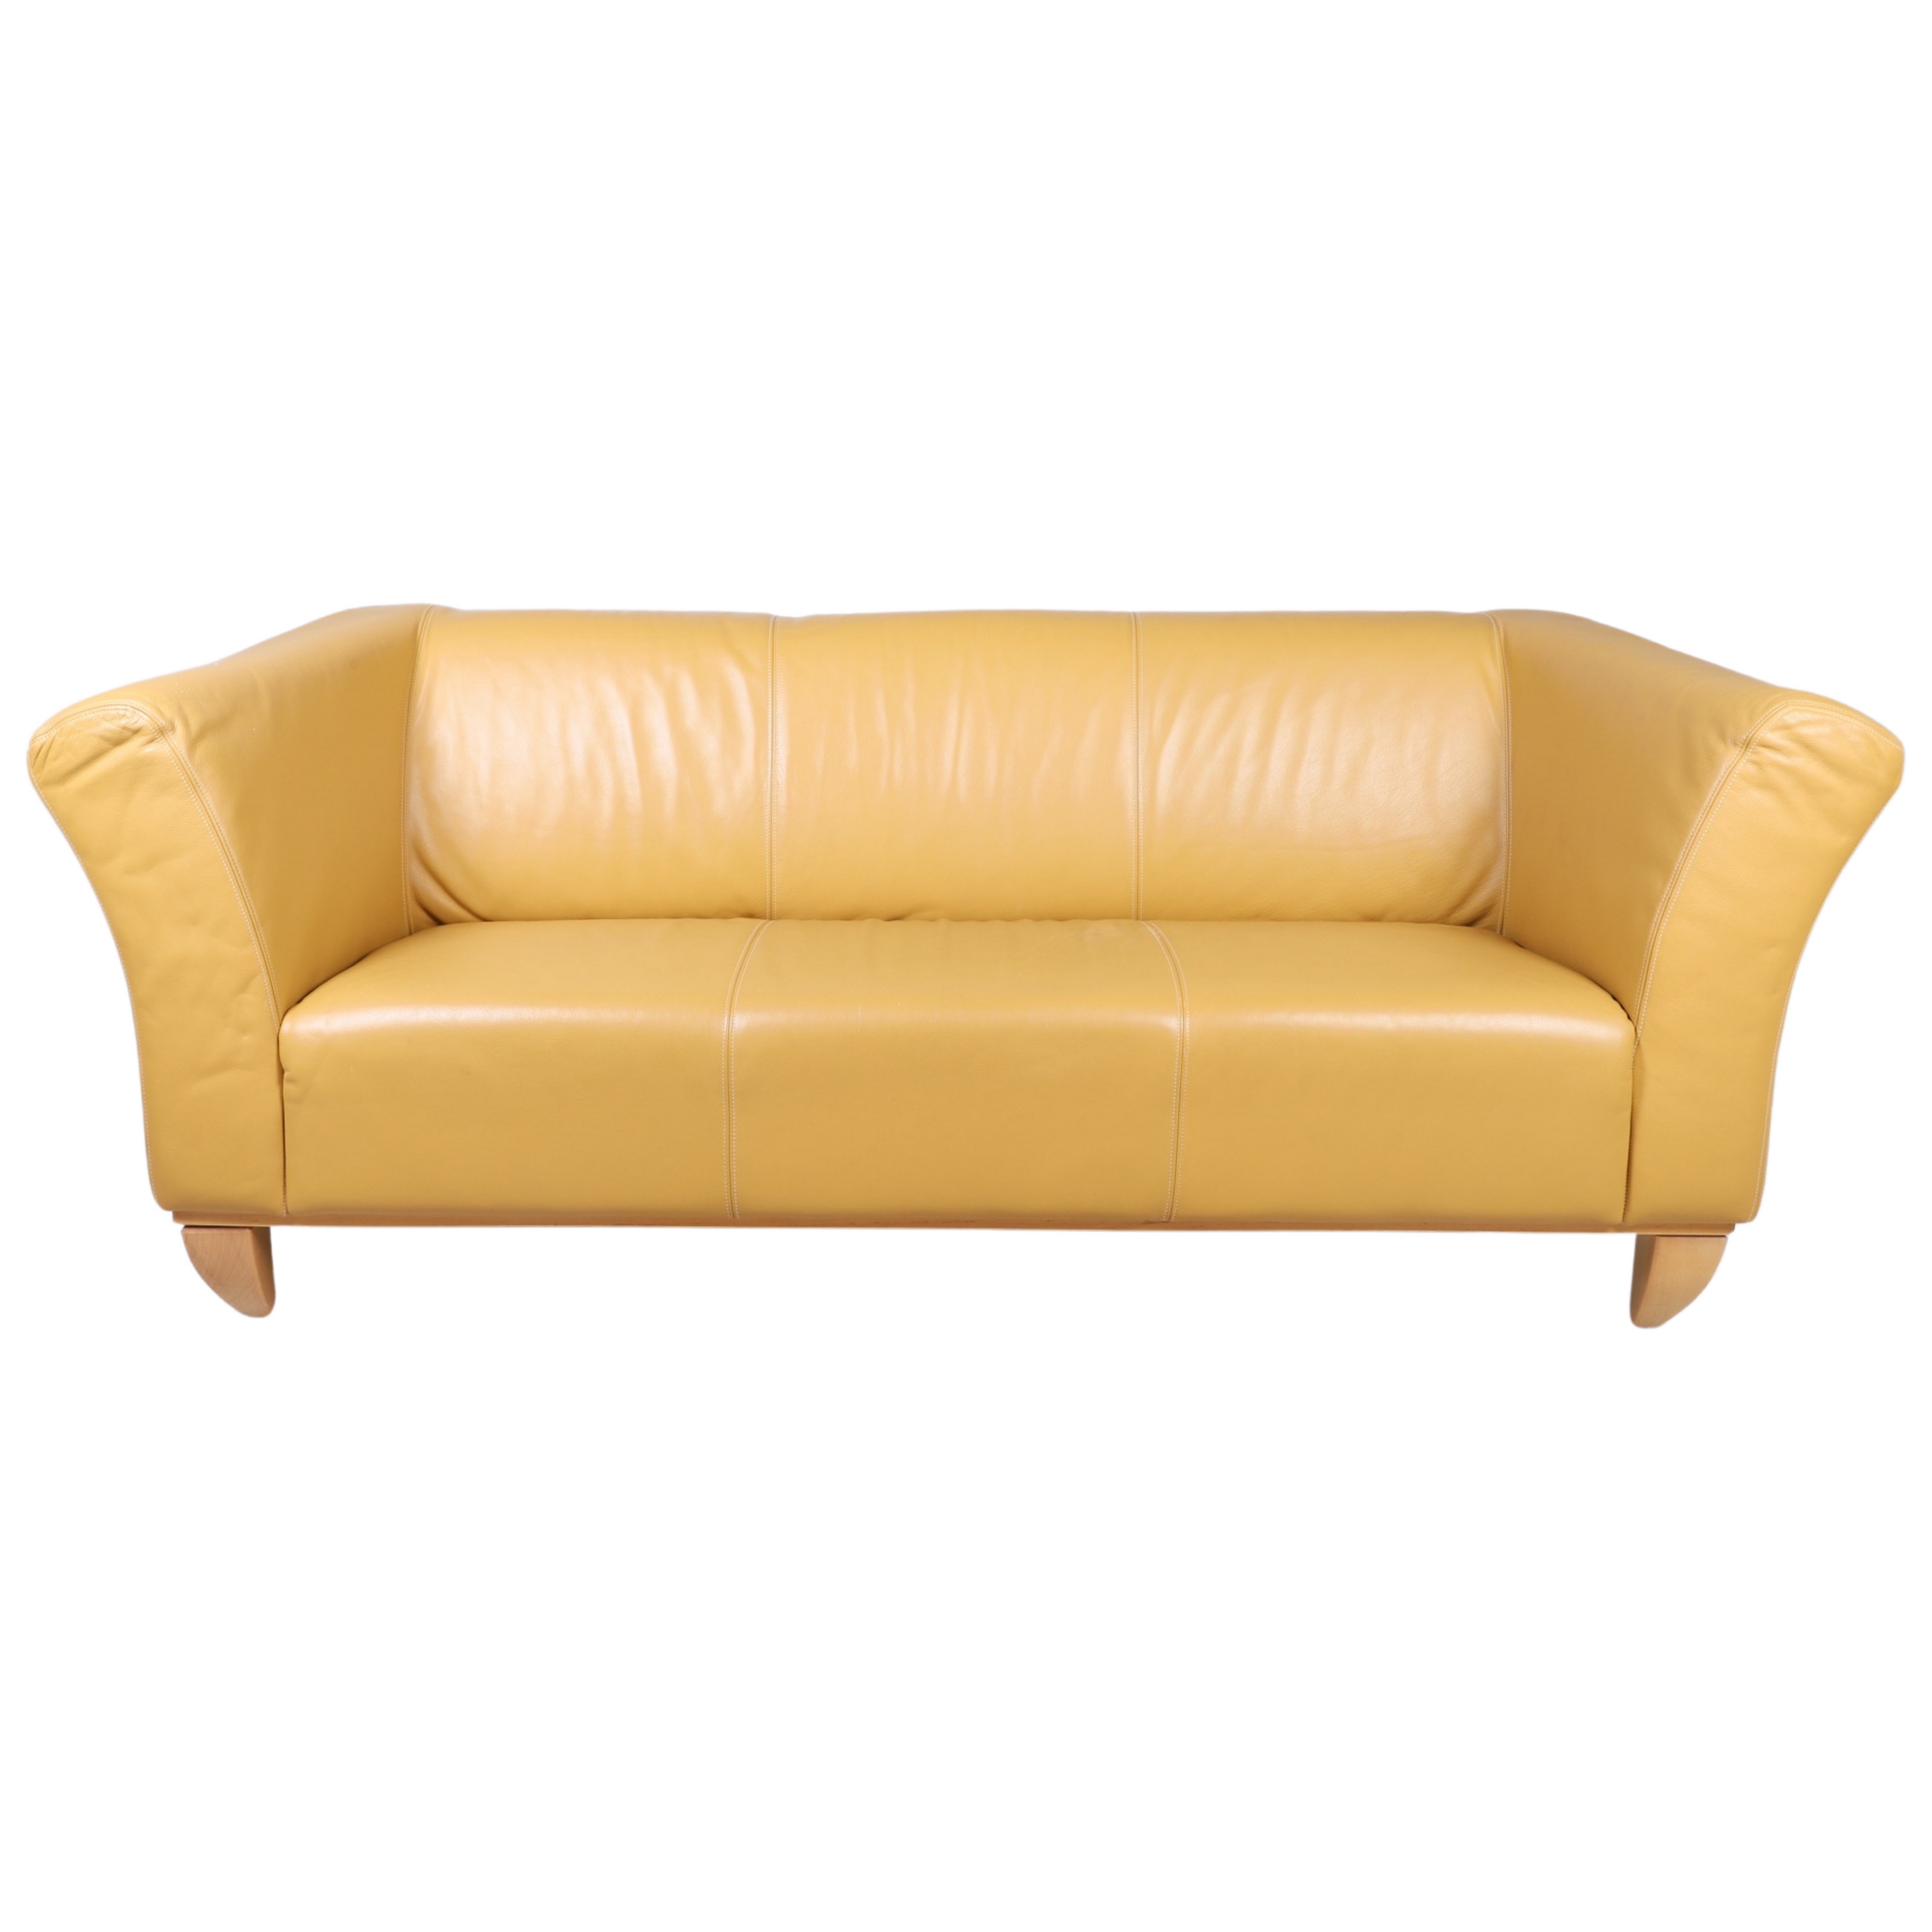 Contemporary stitched leather sofa  30fd95